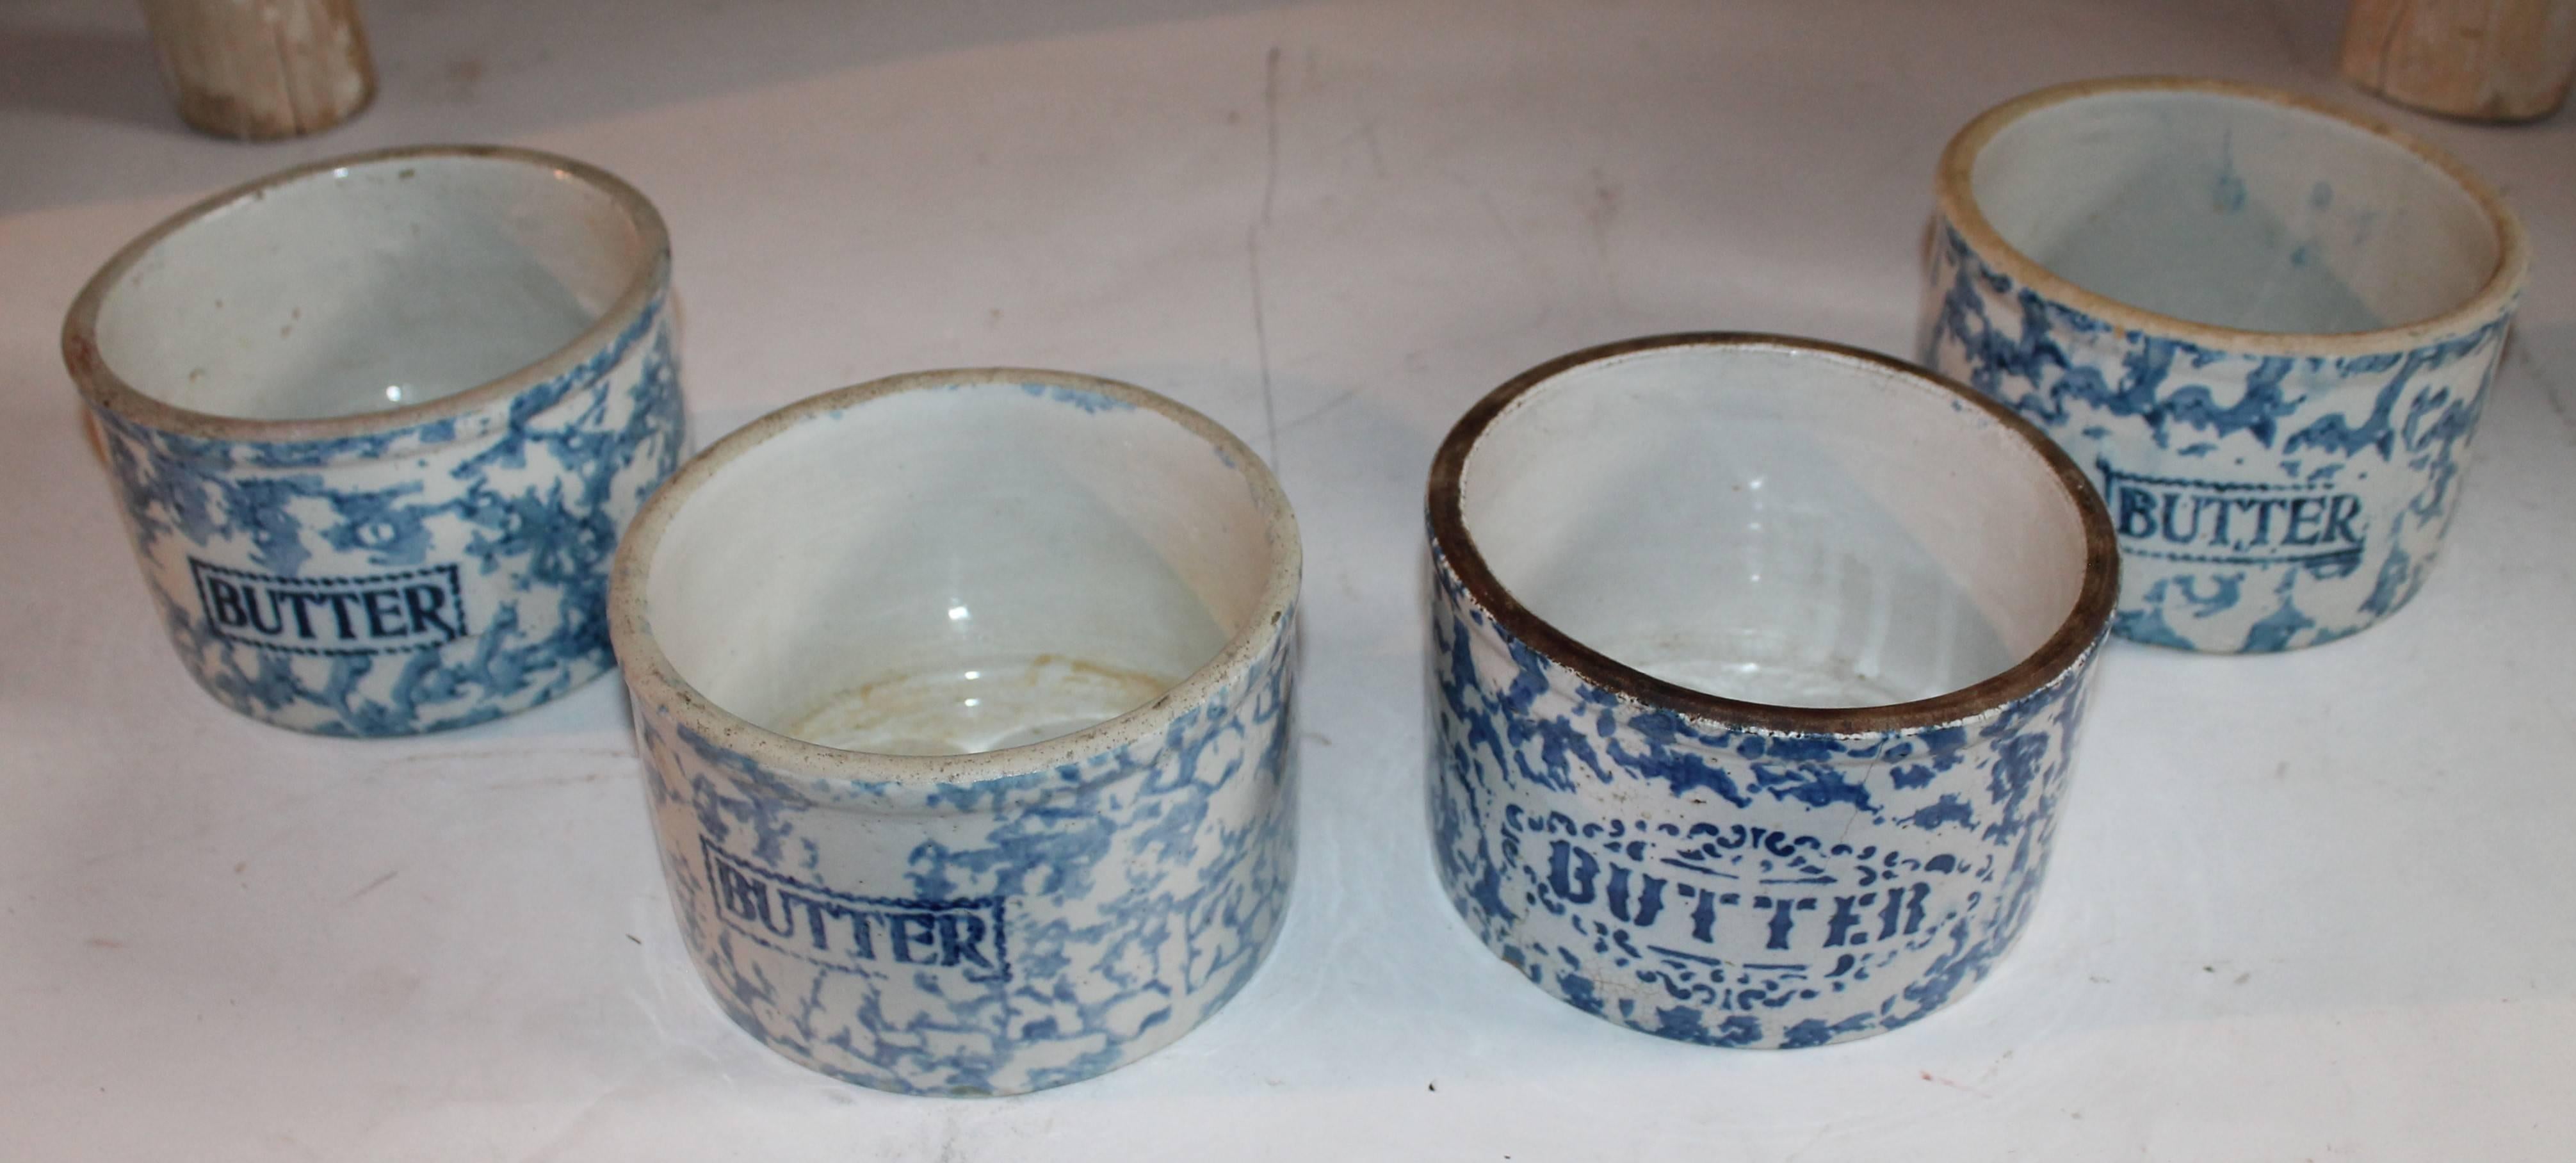 American 19th Century Sponge Ware Butter Crocks / Collection of Four For Sale